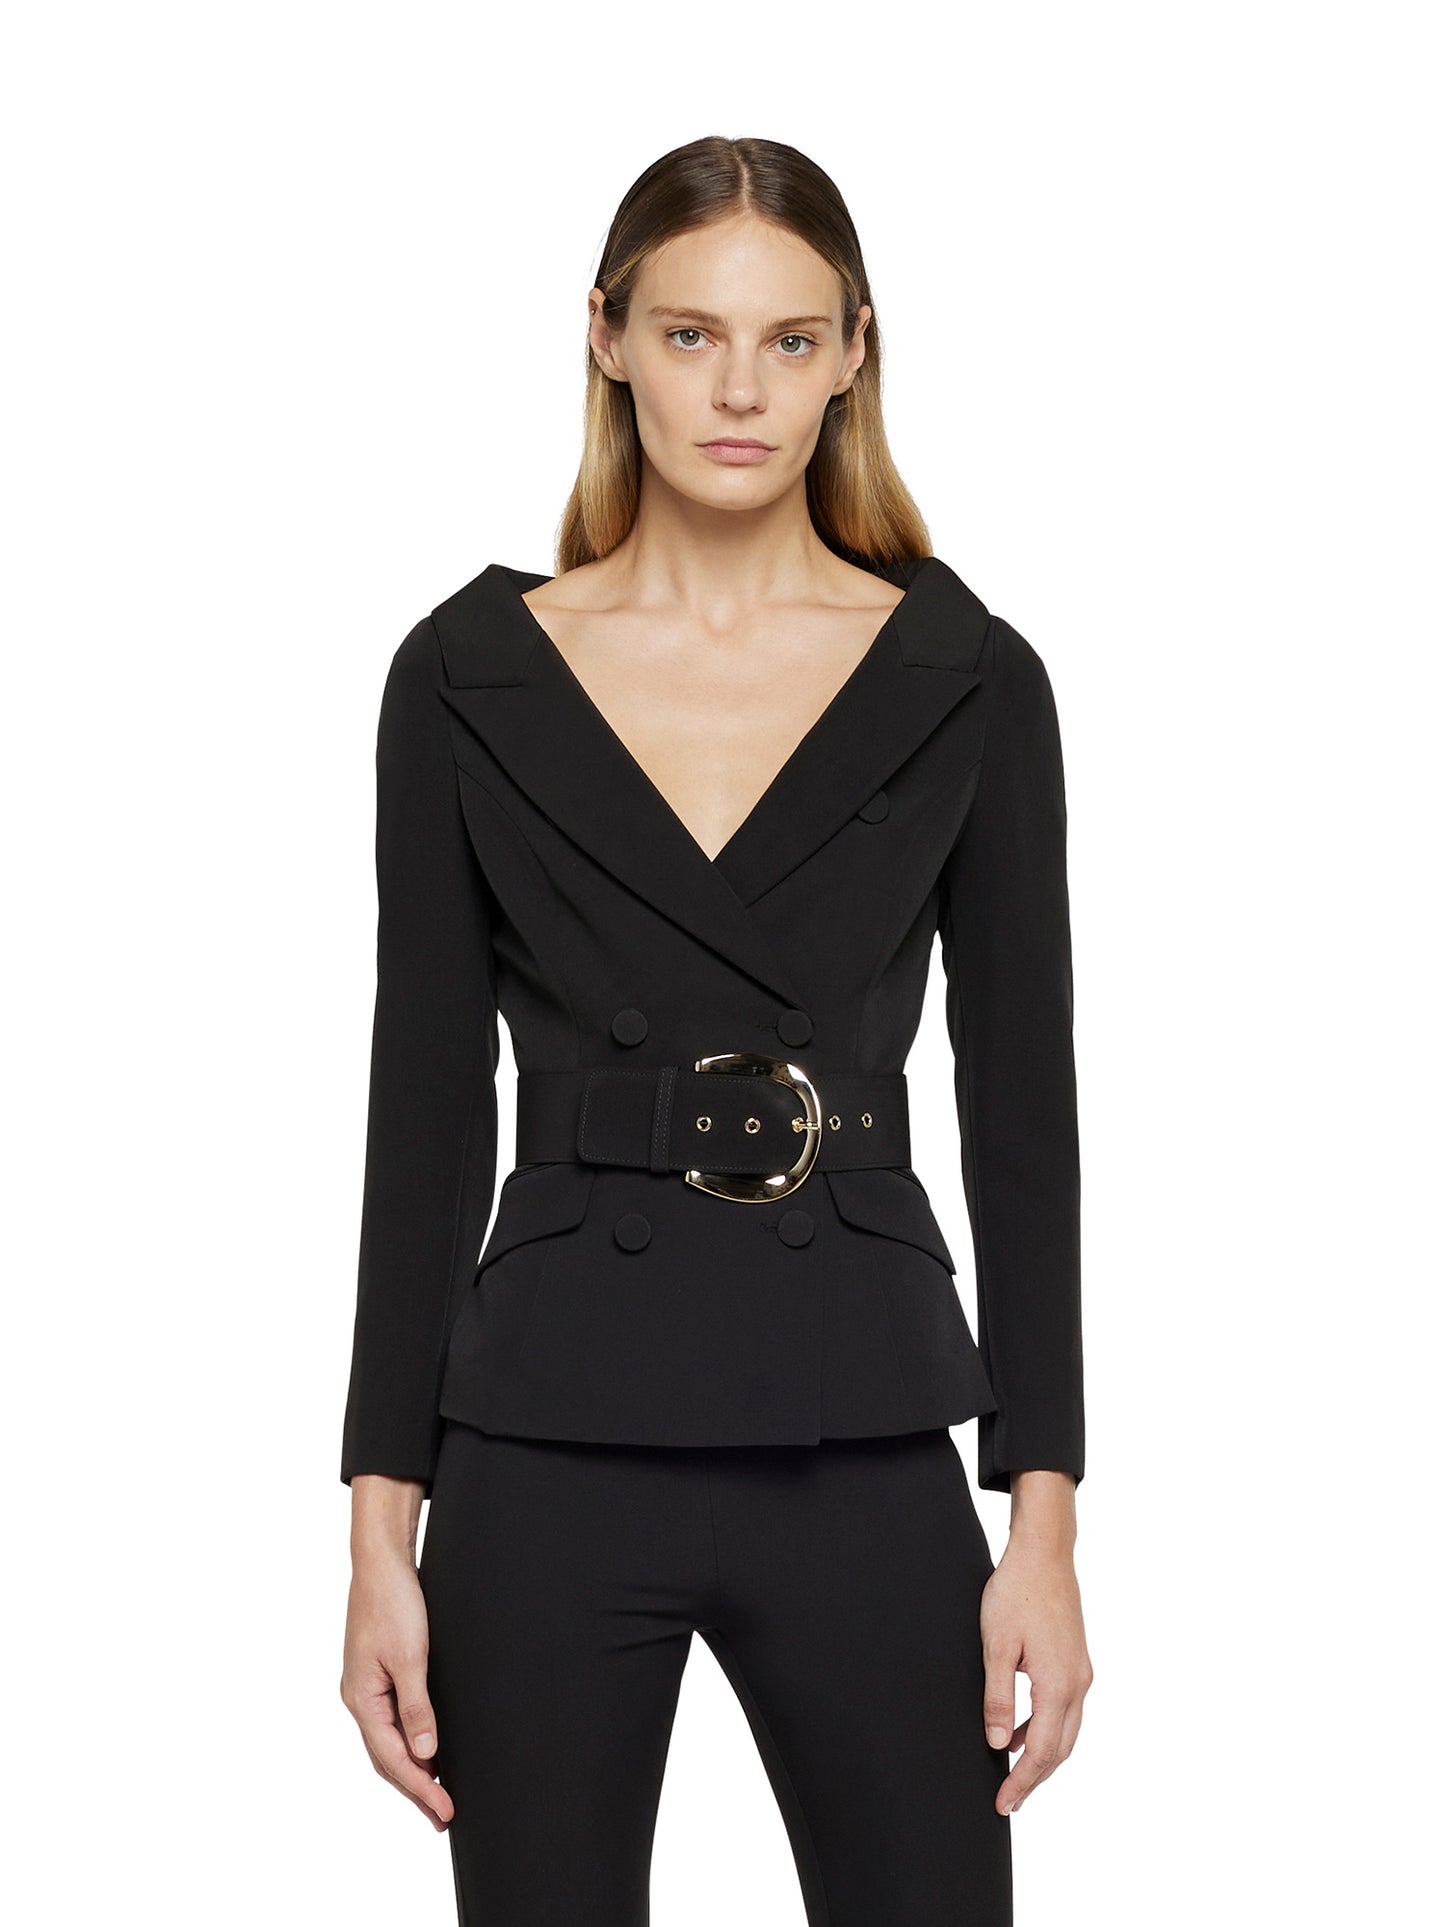 Ultra-feminine jacket in technical fabric with over buckle